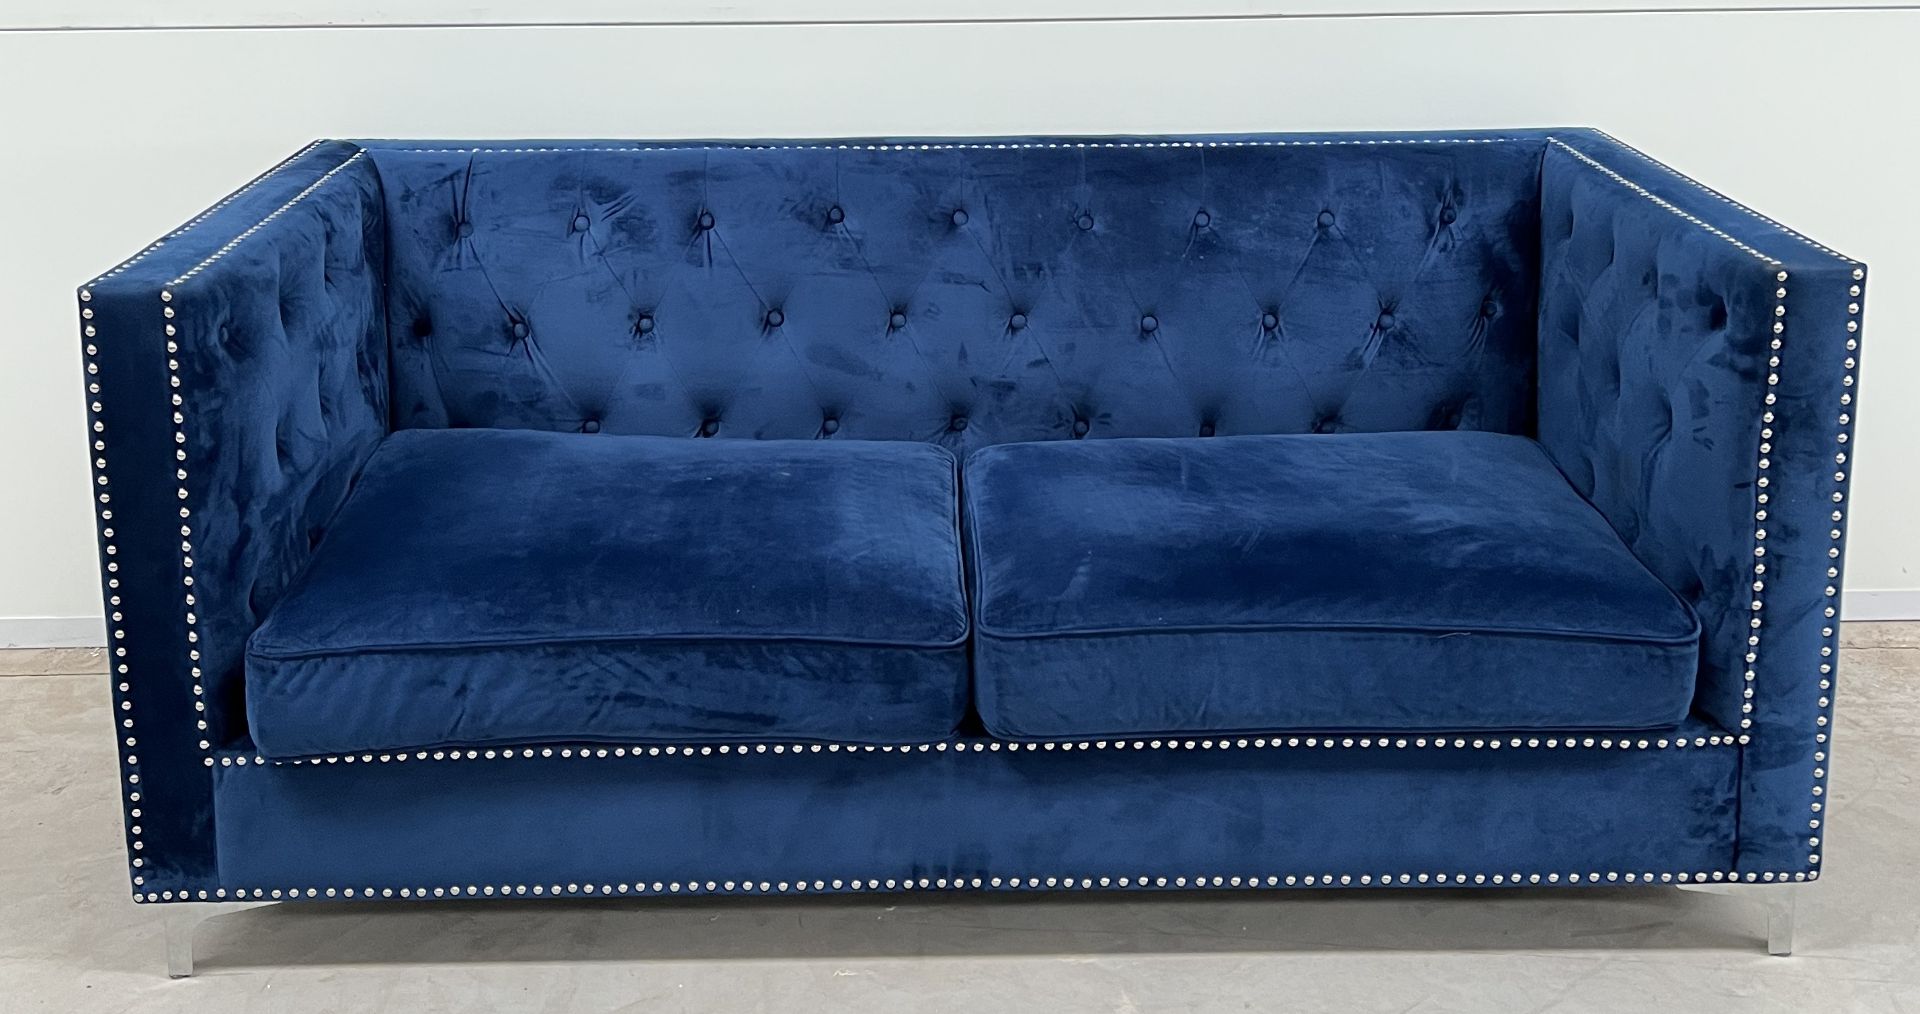 New York Blue Velvet 3 Seater Sofa The New York Collection Gives A Modern Twist On The